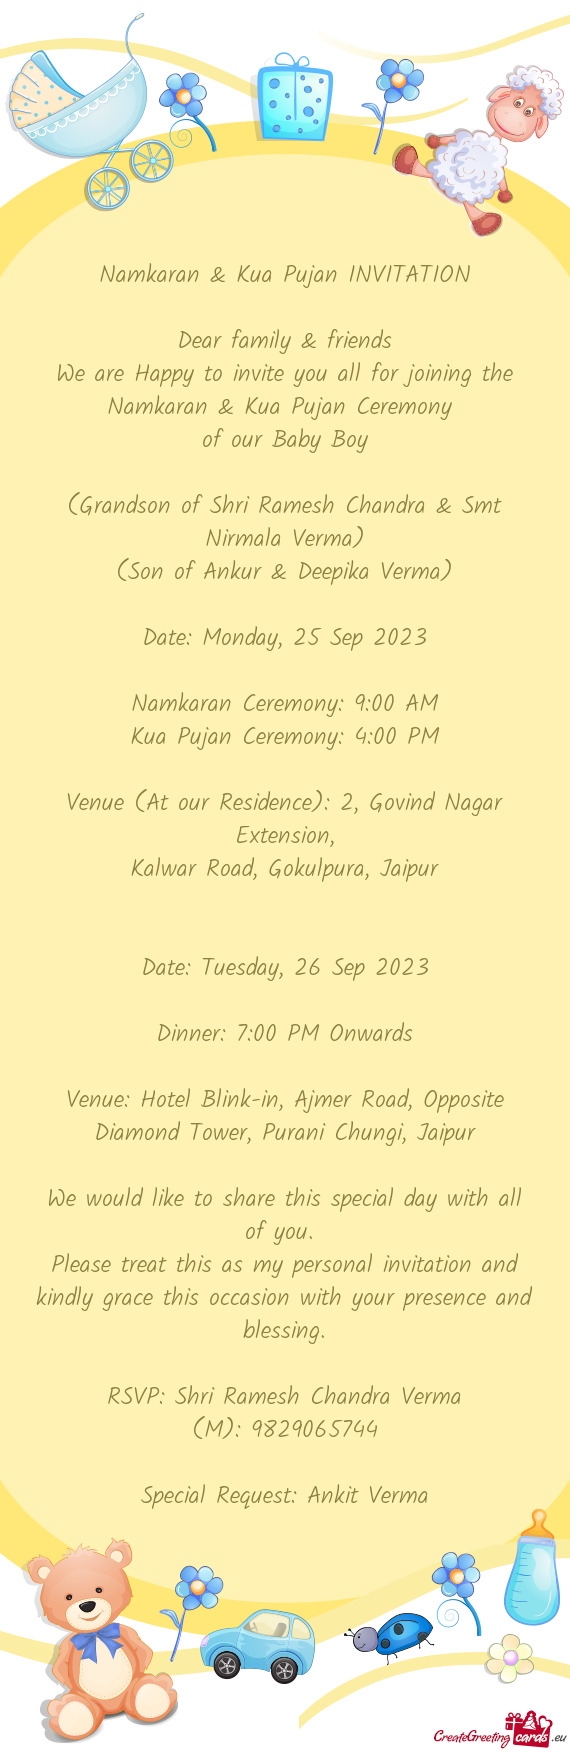 We are Happy to invite you all for joining the Namkaran & Kua Pujan Ceremony